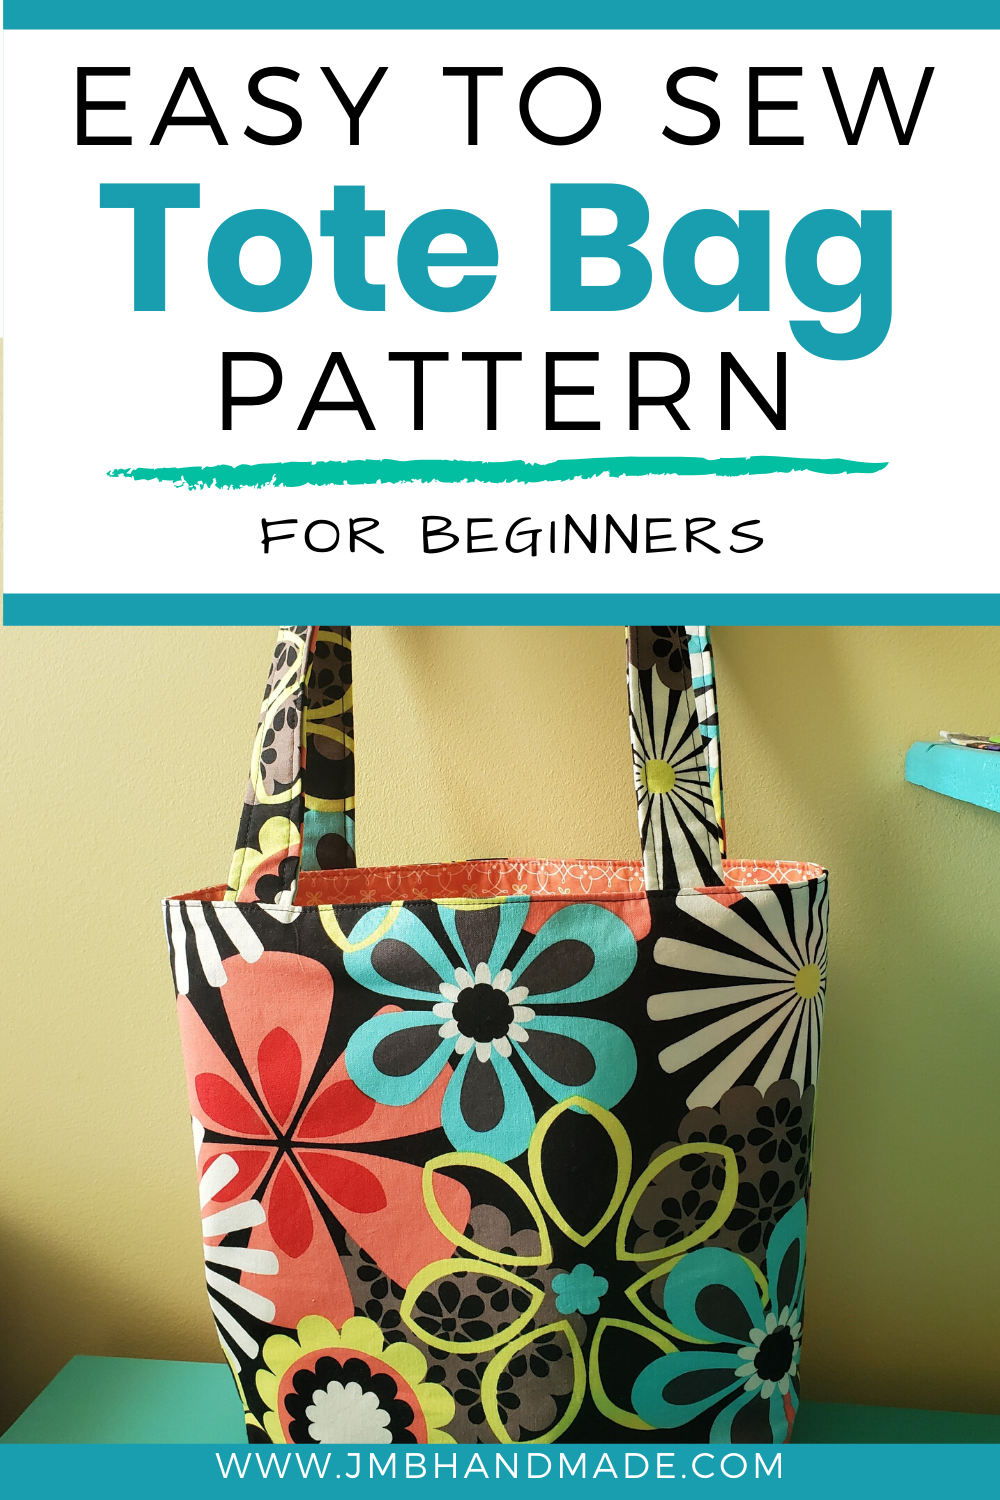 Easy to Sew Tote Bag Pattern - Easy to Sew Tote Bag Pattern -   17 diy Bag step by step ideas